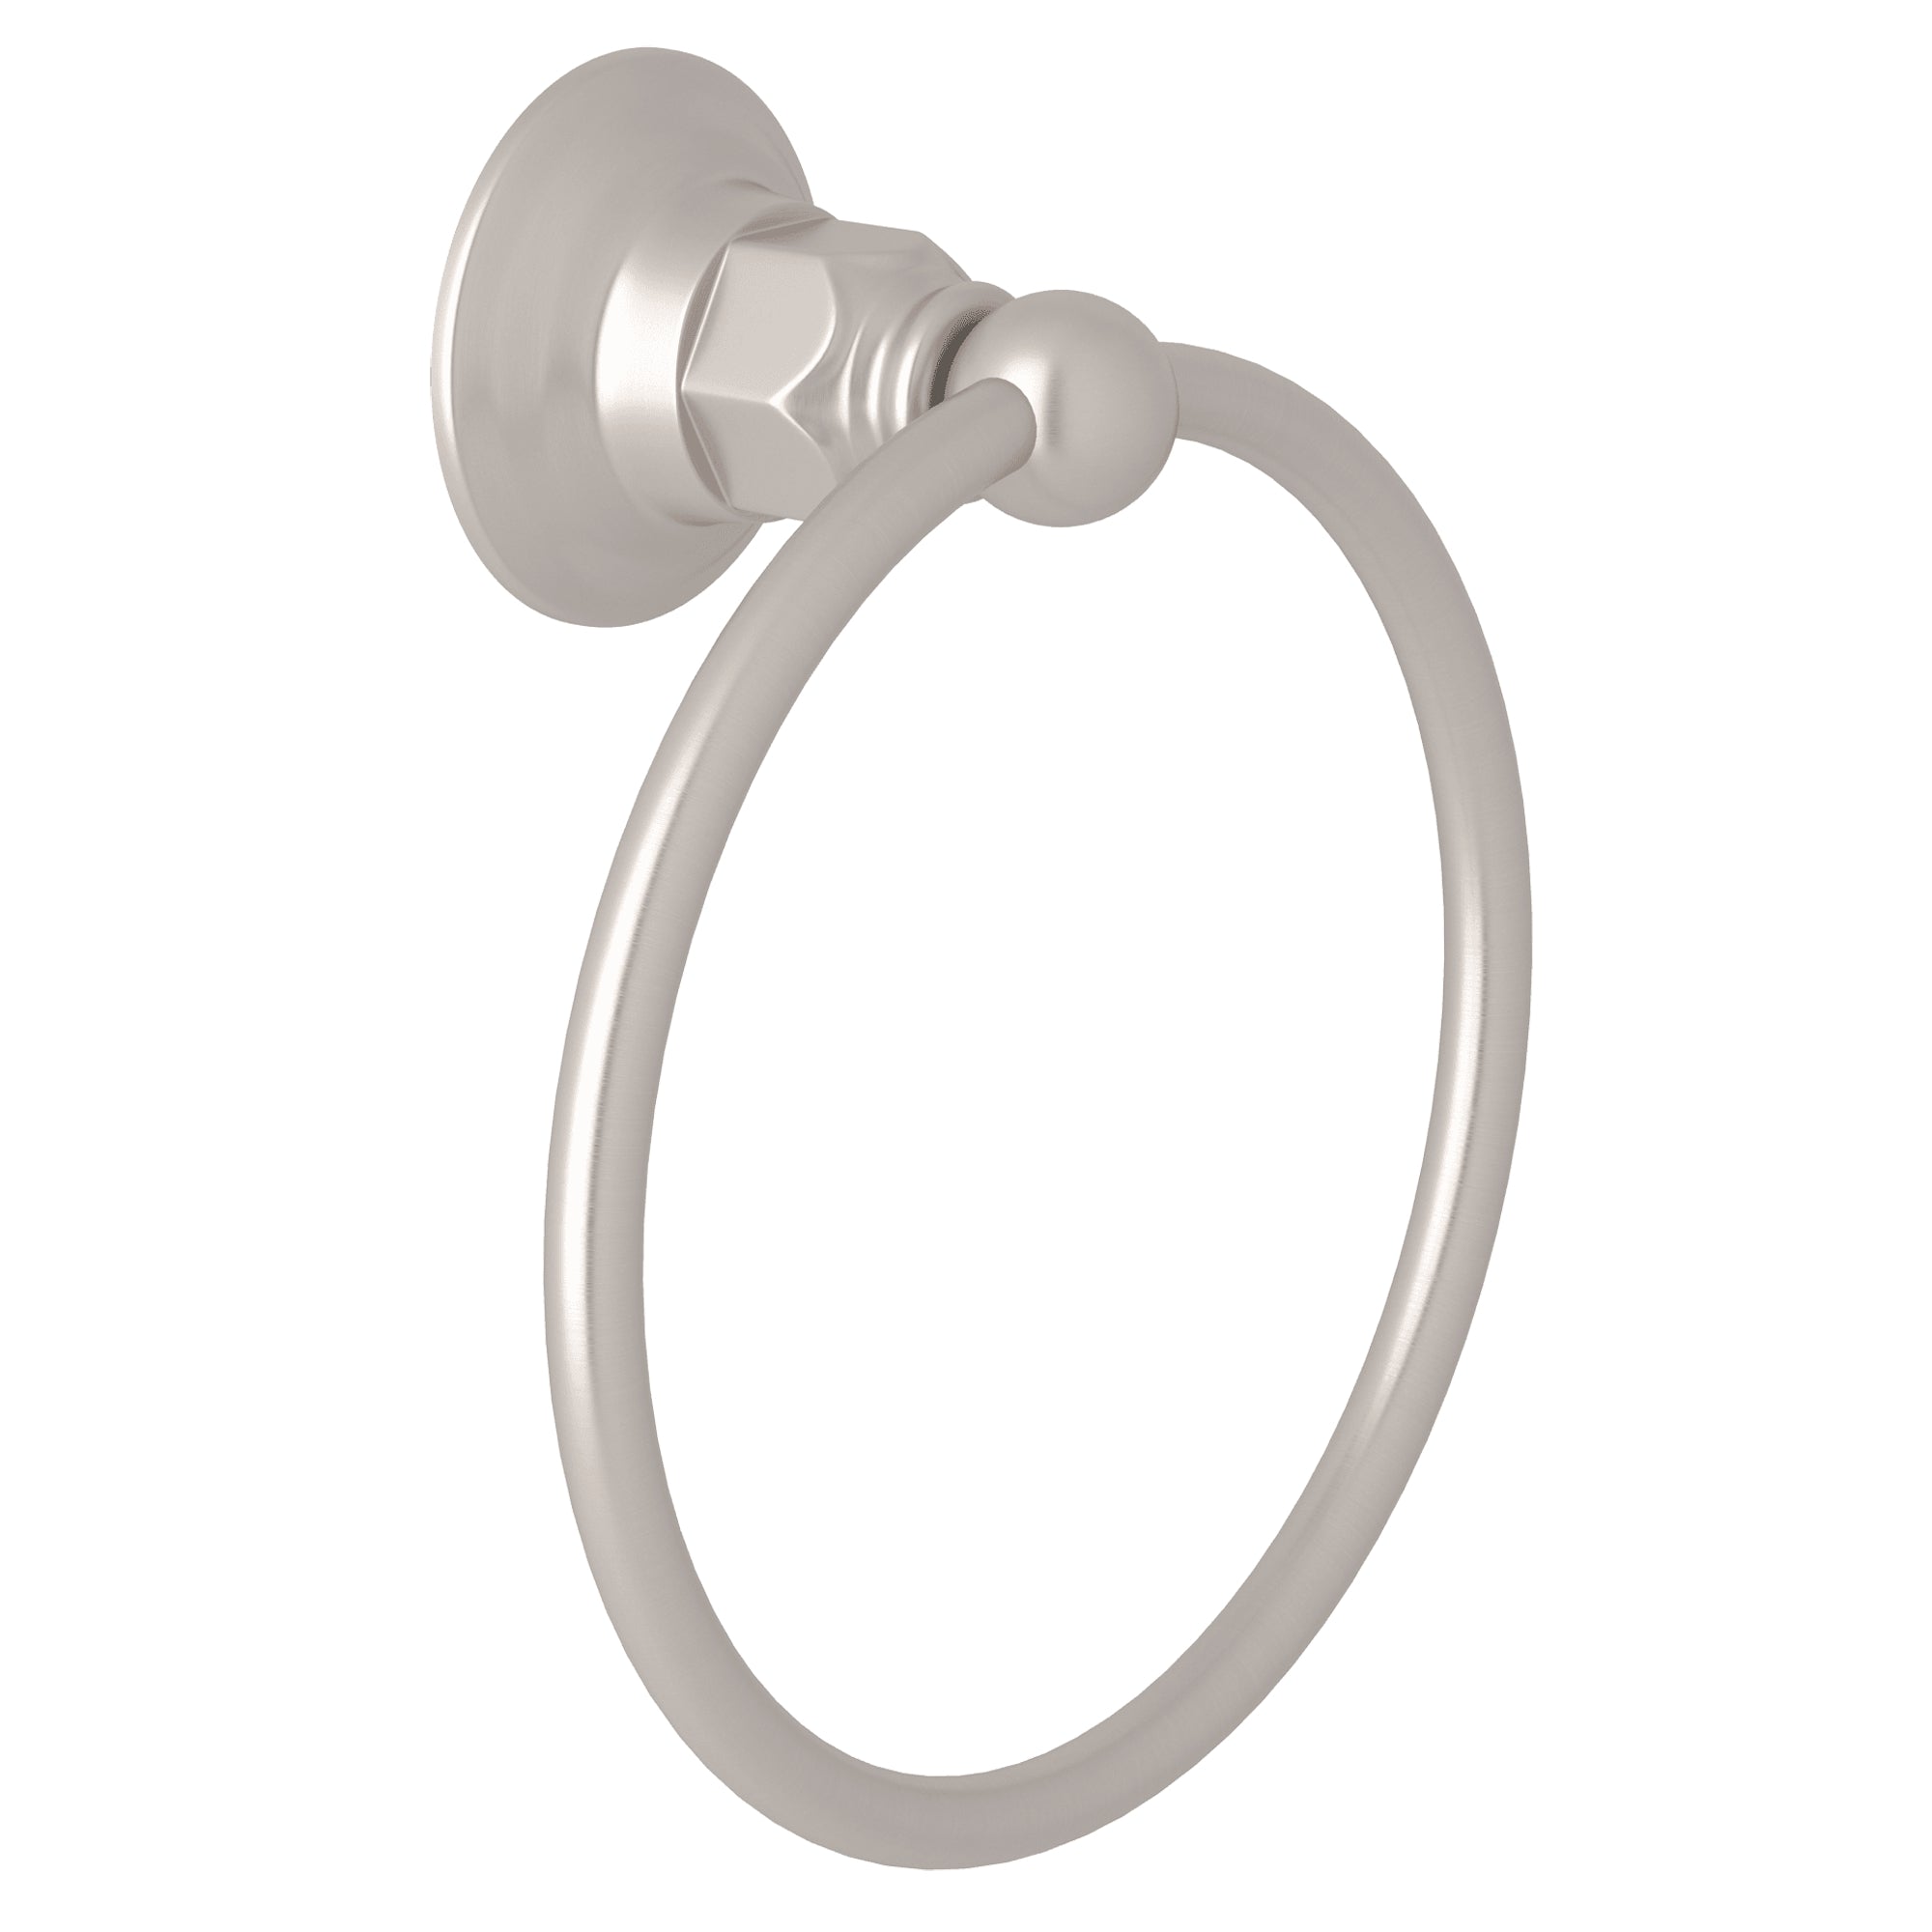 ROHL ROT4 Towel Ring